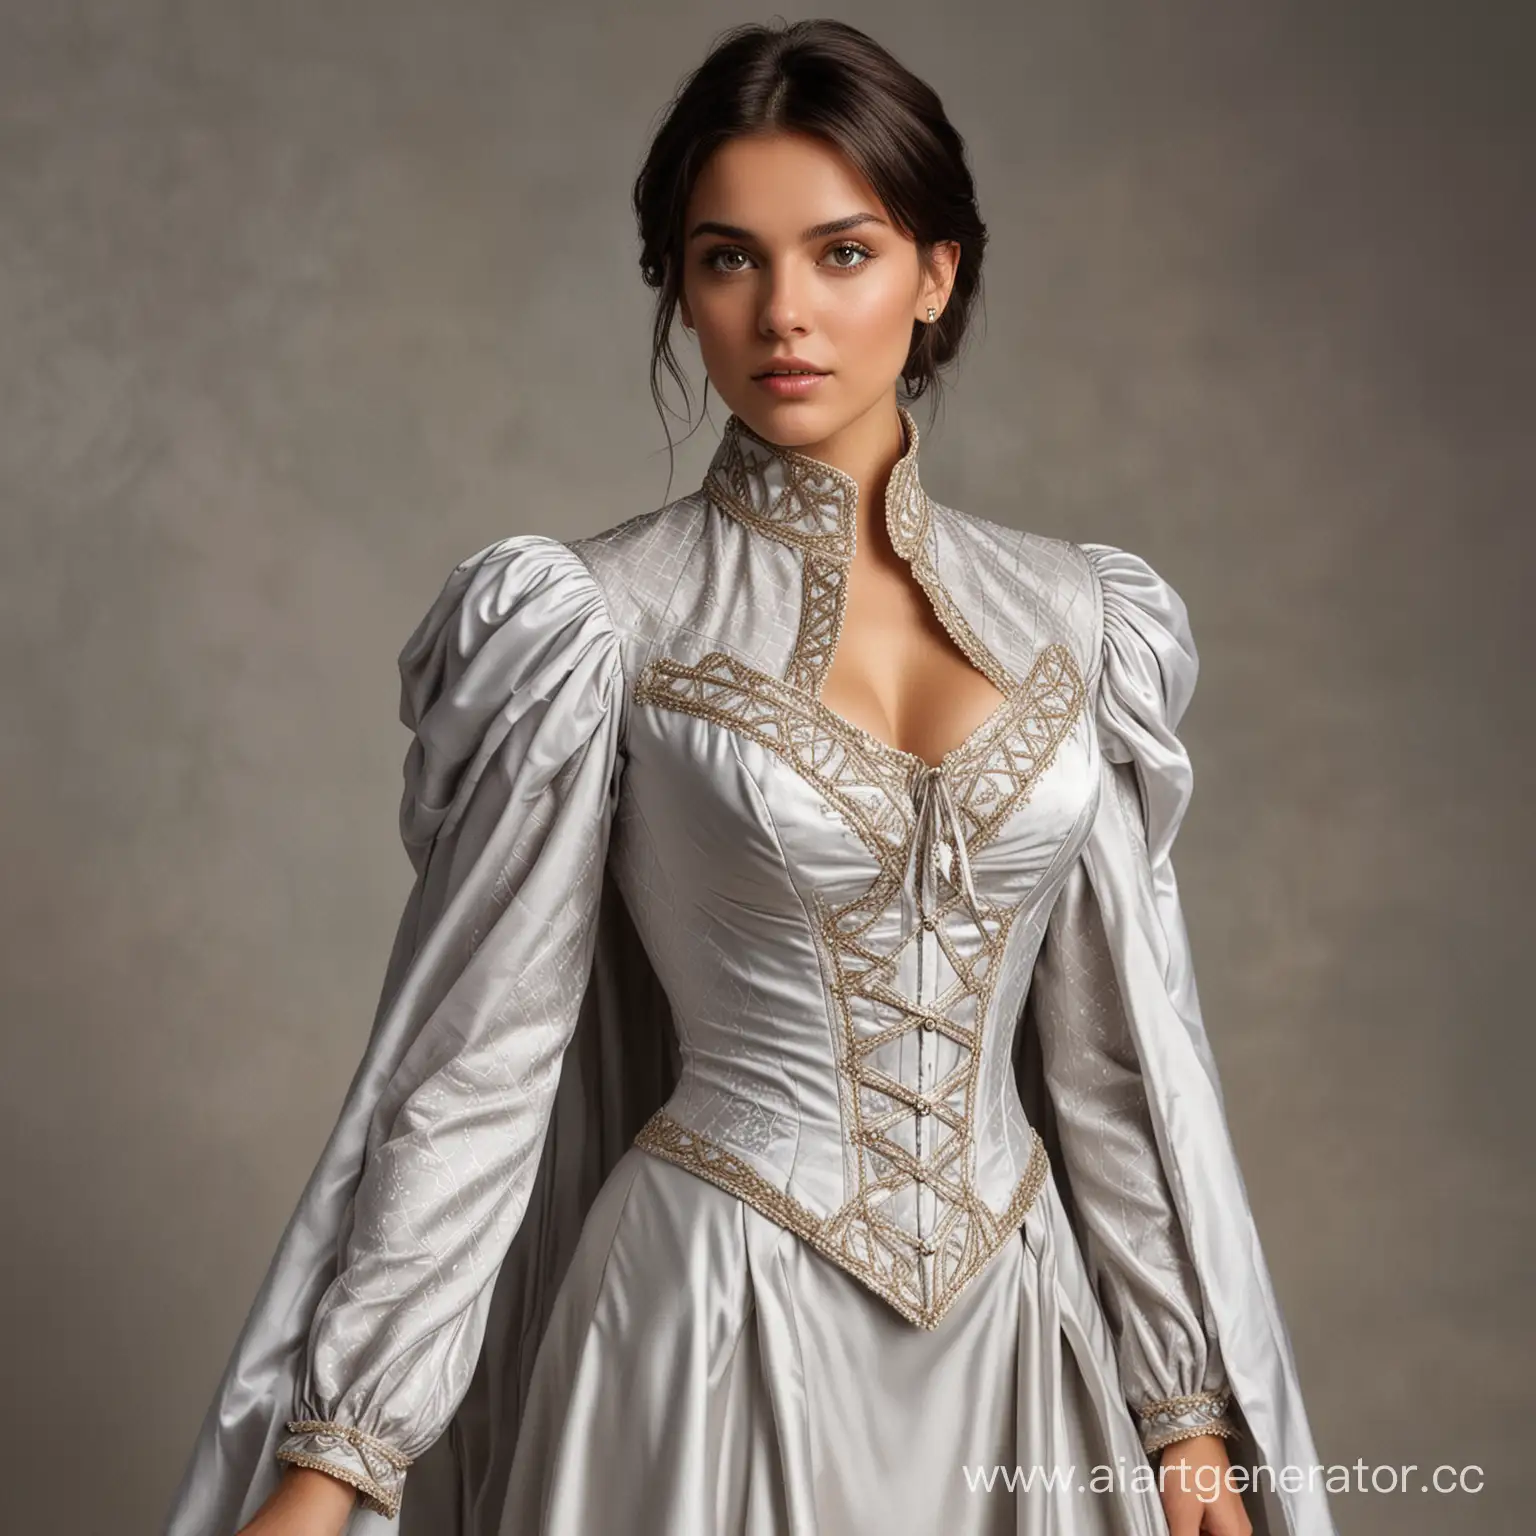 A young brunette female mage with short hair falling to shoulder length, tanned skin and dark eyes, dressed with a robe that has a fine, tight collar open in a diamond pattern over a corset that covers the bust, with wide silk sleeves and a flowing ankle-length skirt, the entire suit in pearl gray fabric.